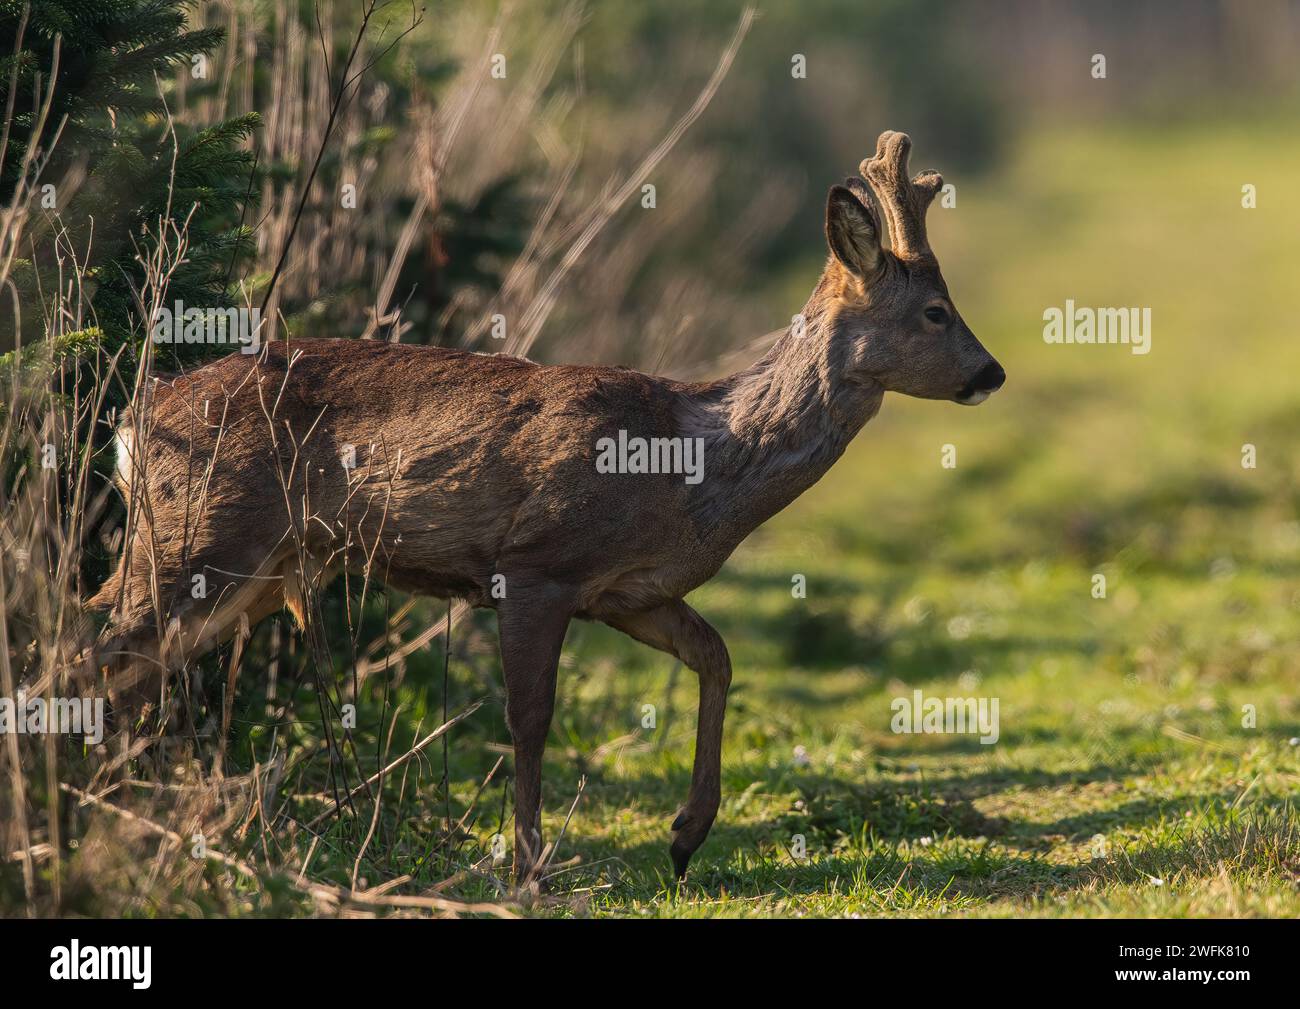 A Male  Roe Deer (Capreolus capreolus) moving through  a crop of Christmas trees i the sunshine on a Suffolk Farm .  UK. Stock Photo